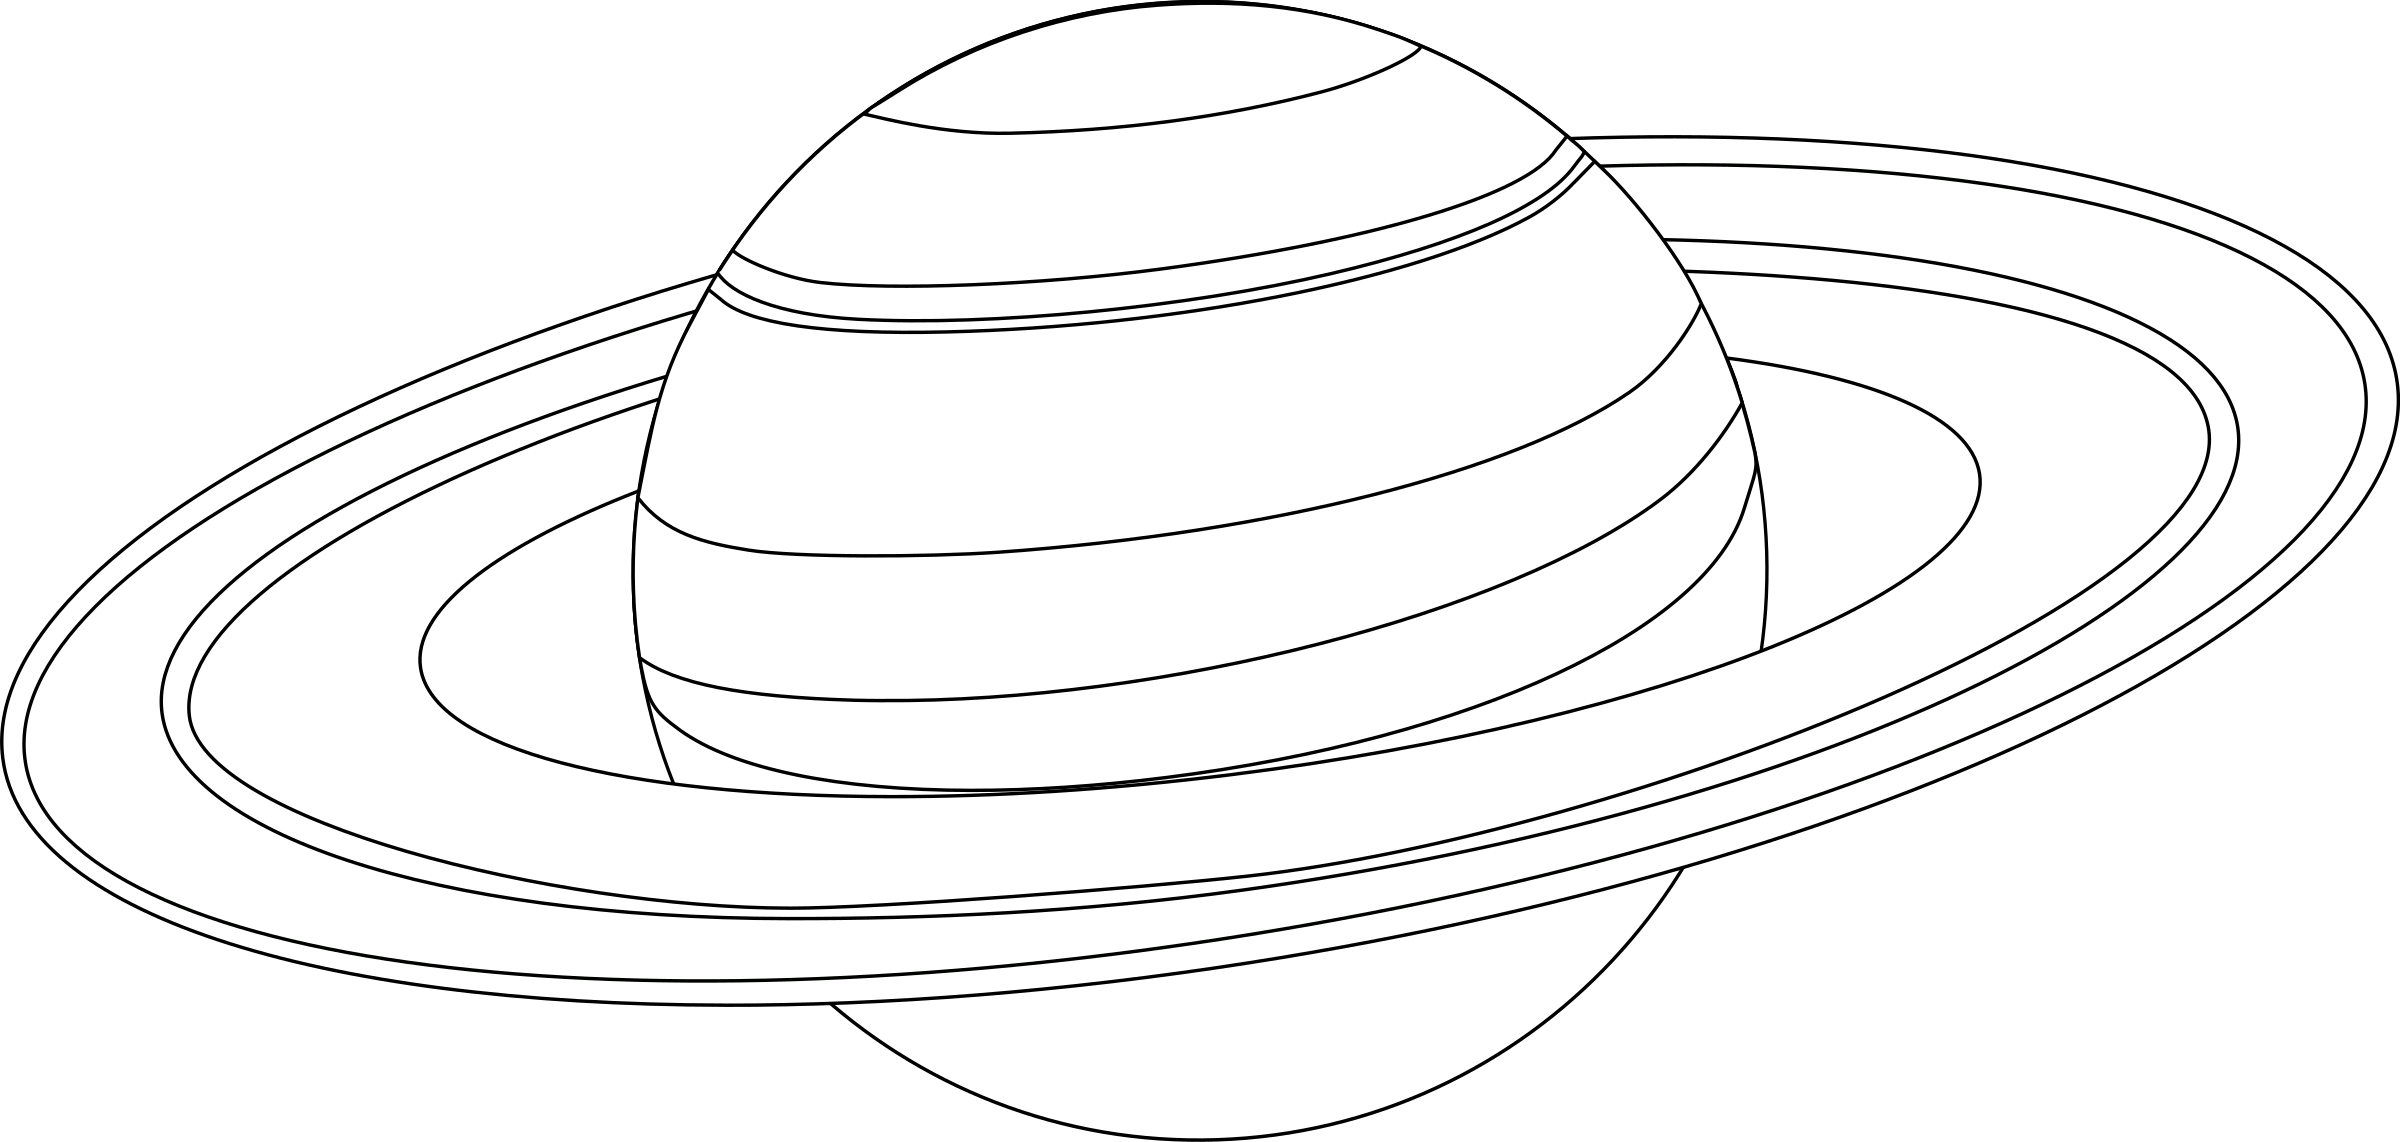 6 Pics of Saturn Planet Coloring Pages - Saturn Planet Outline ...